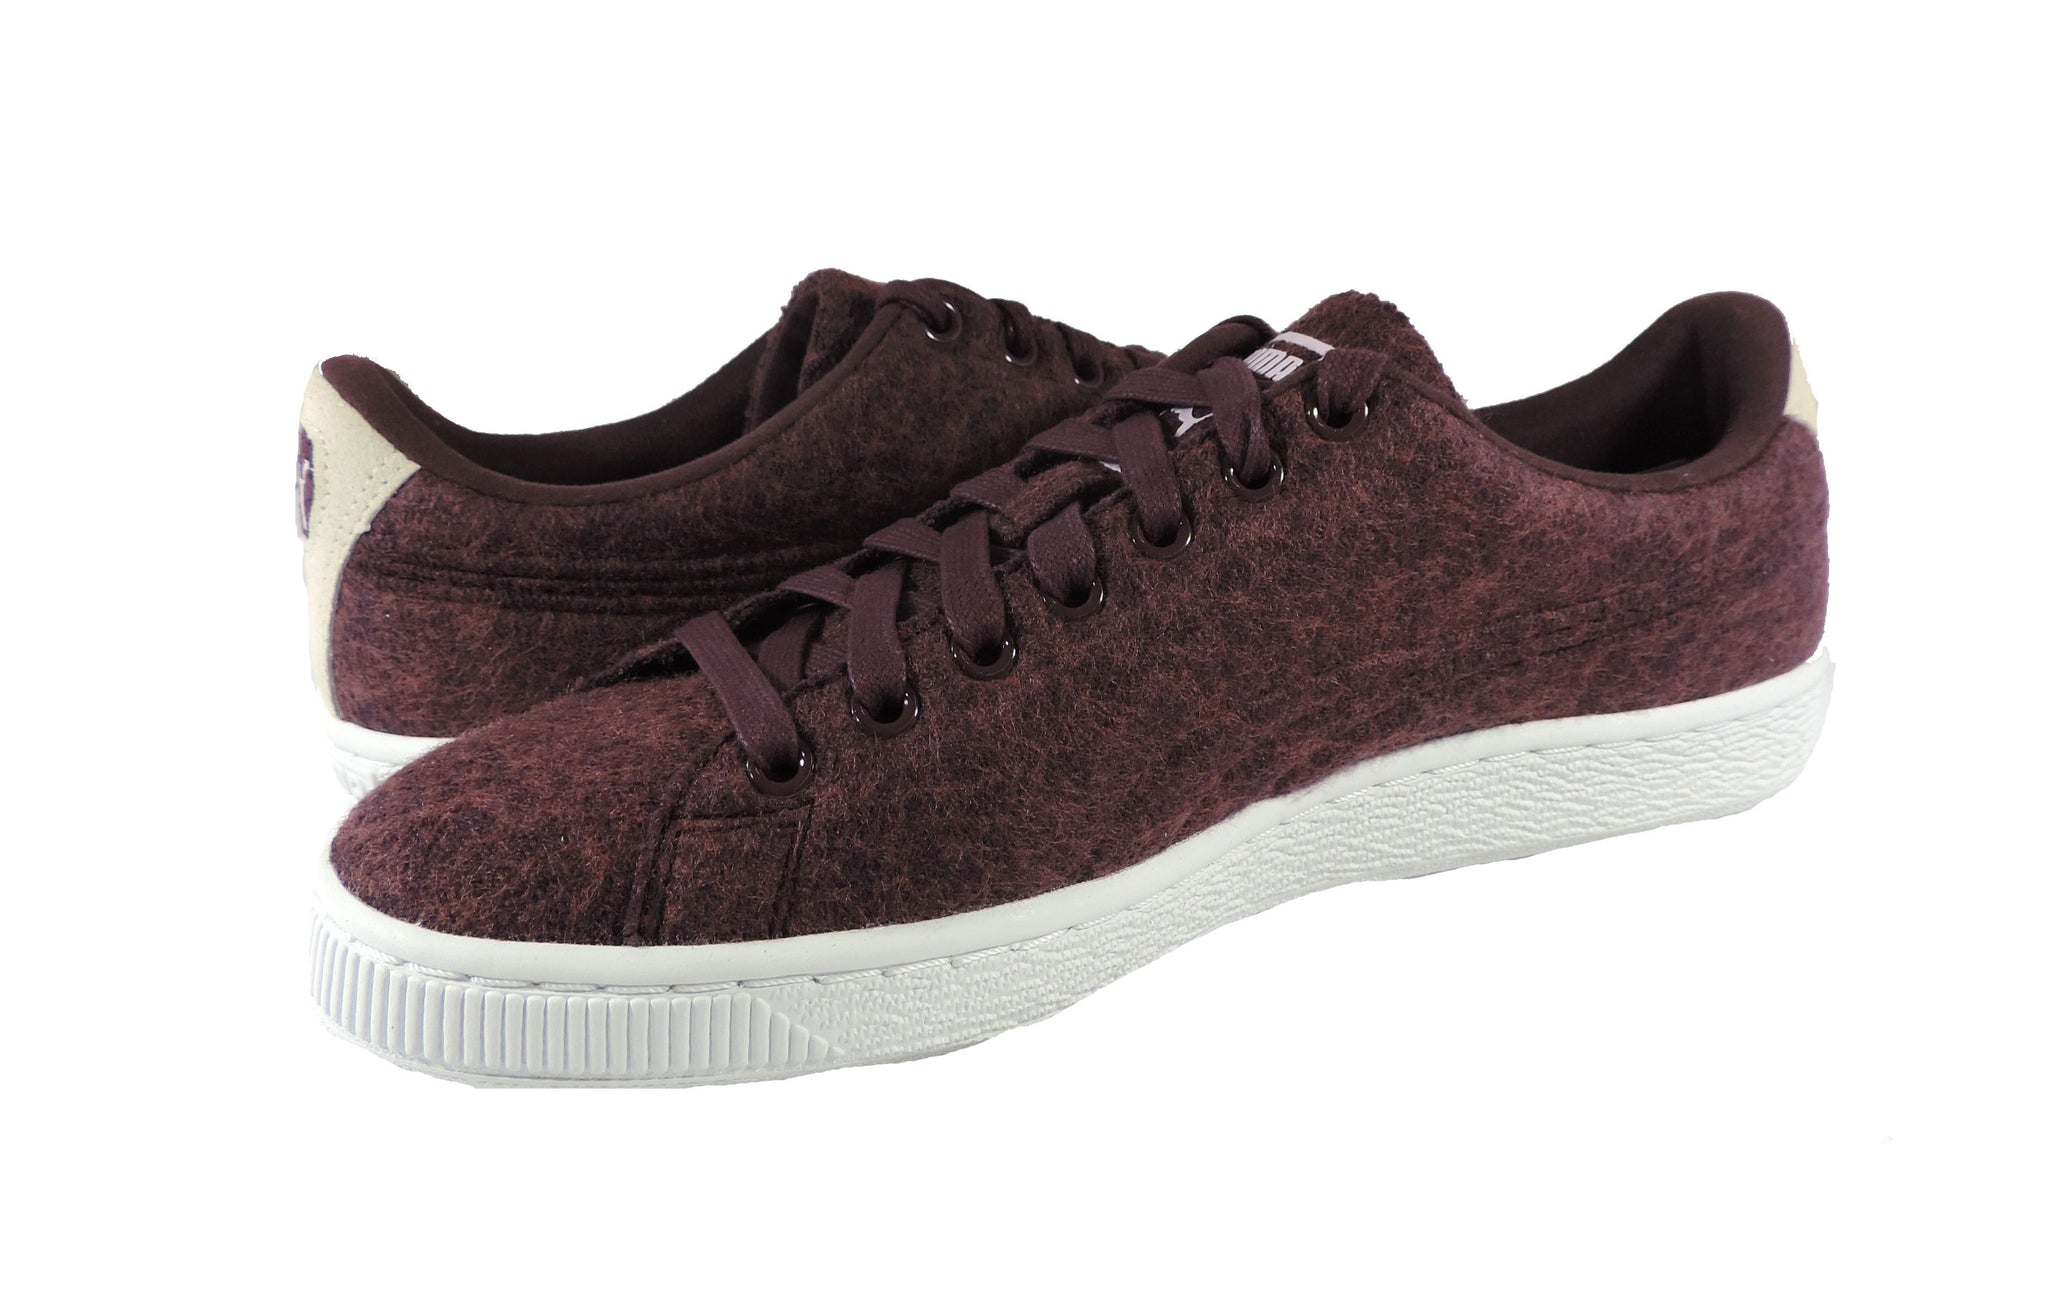 Entrelazamiento Escultor Natura PUMA BASKET CLASSIC EMBOSSED WOOL – Got Your Shoes